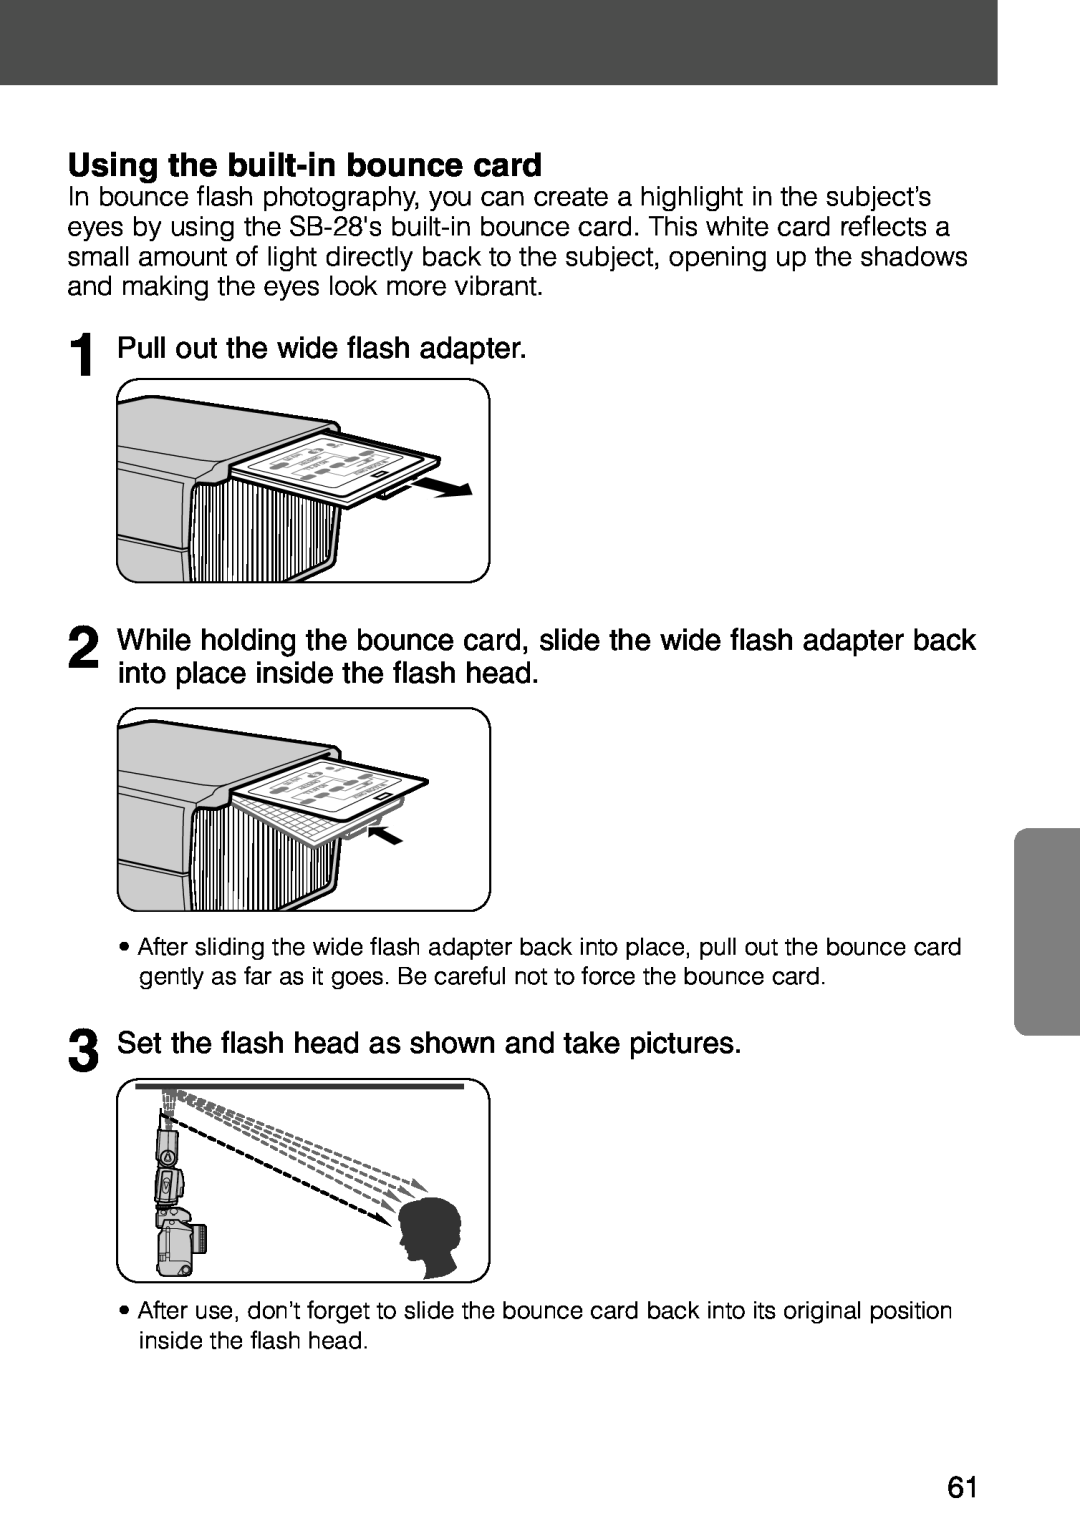 Nikon SB-28 instruction manual Using the built-inbounce card, 1Pull out the wide flash adapter 